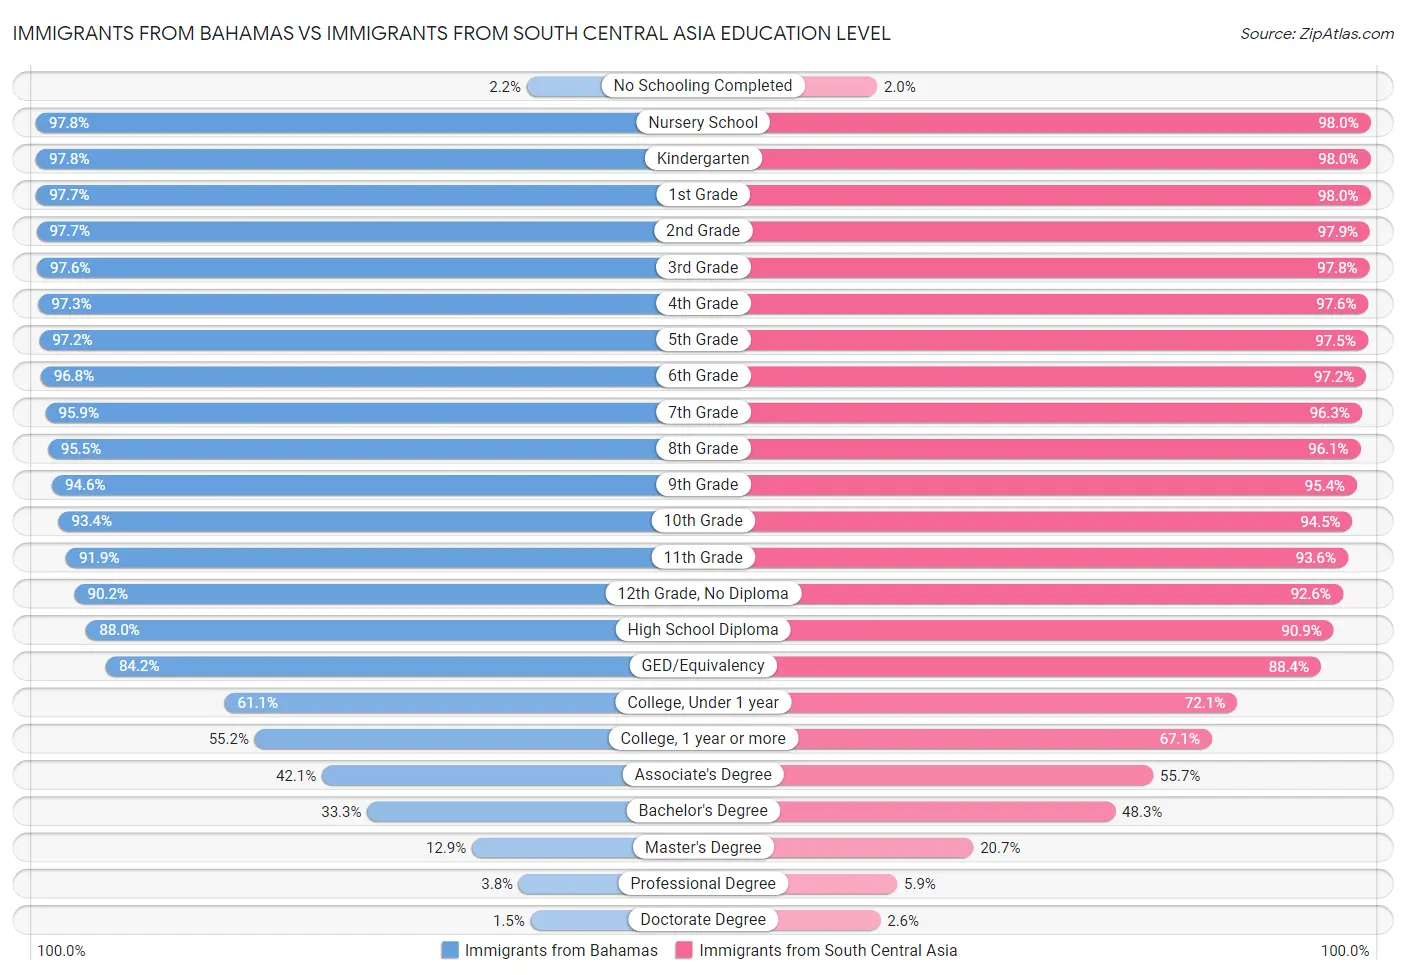 Immigrants from Bahamas vs Immigrants from South Central Asia Education Level